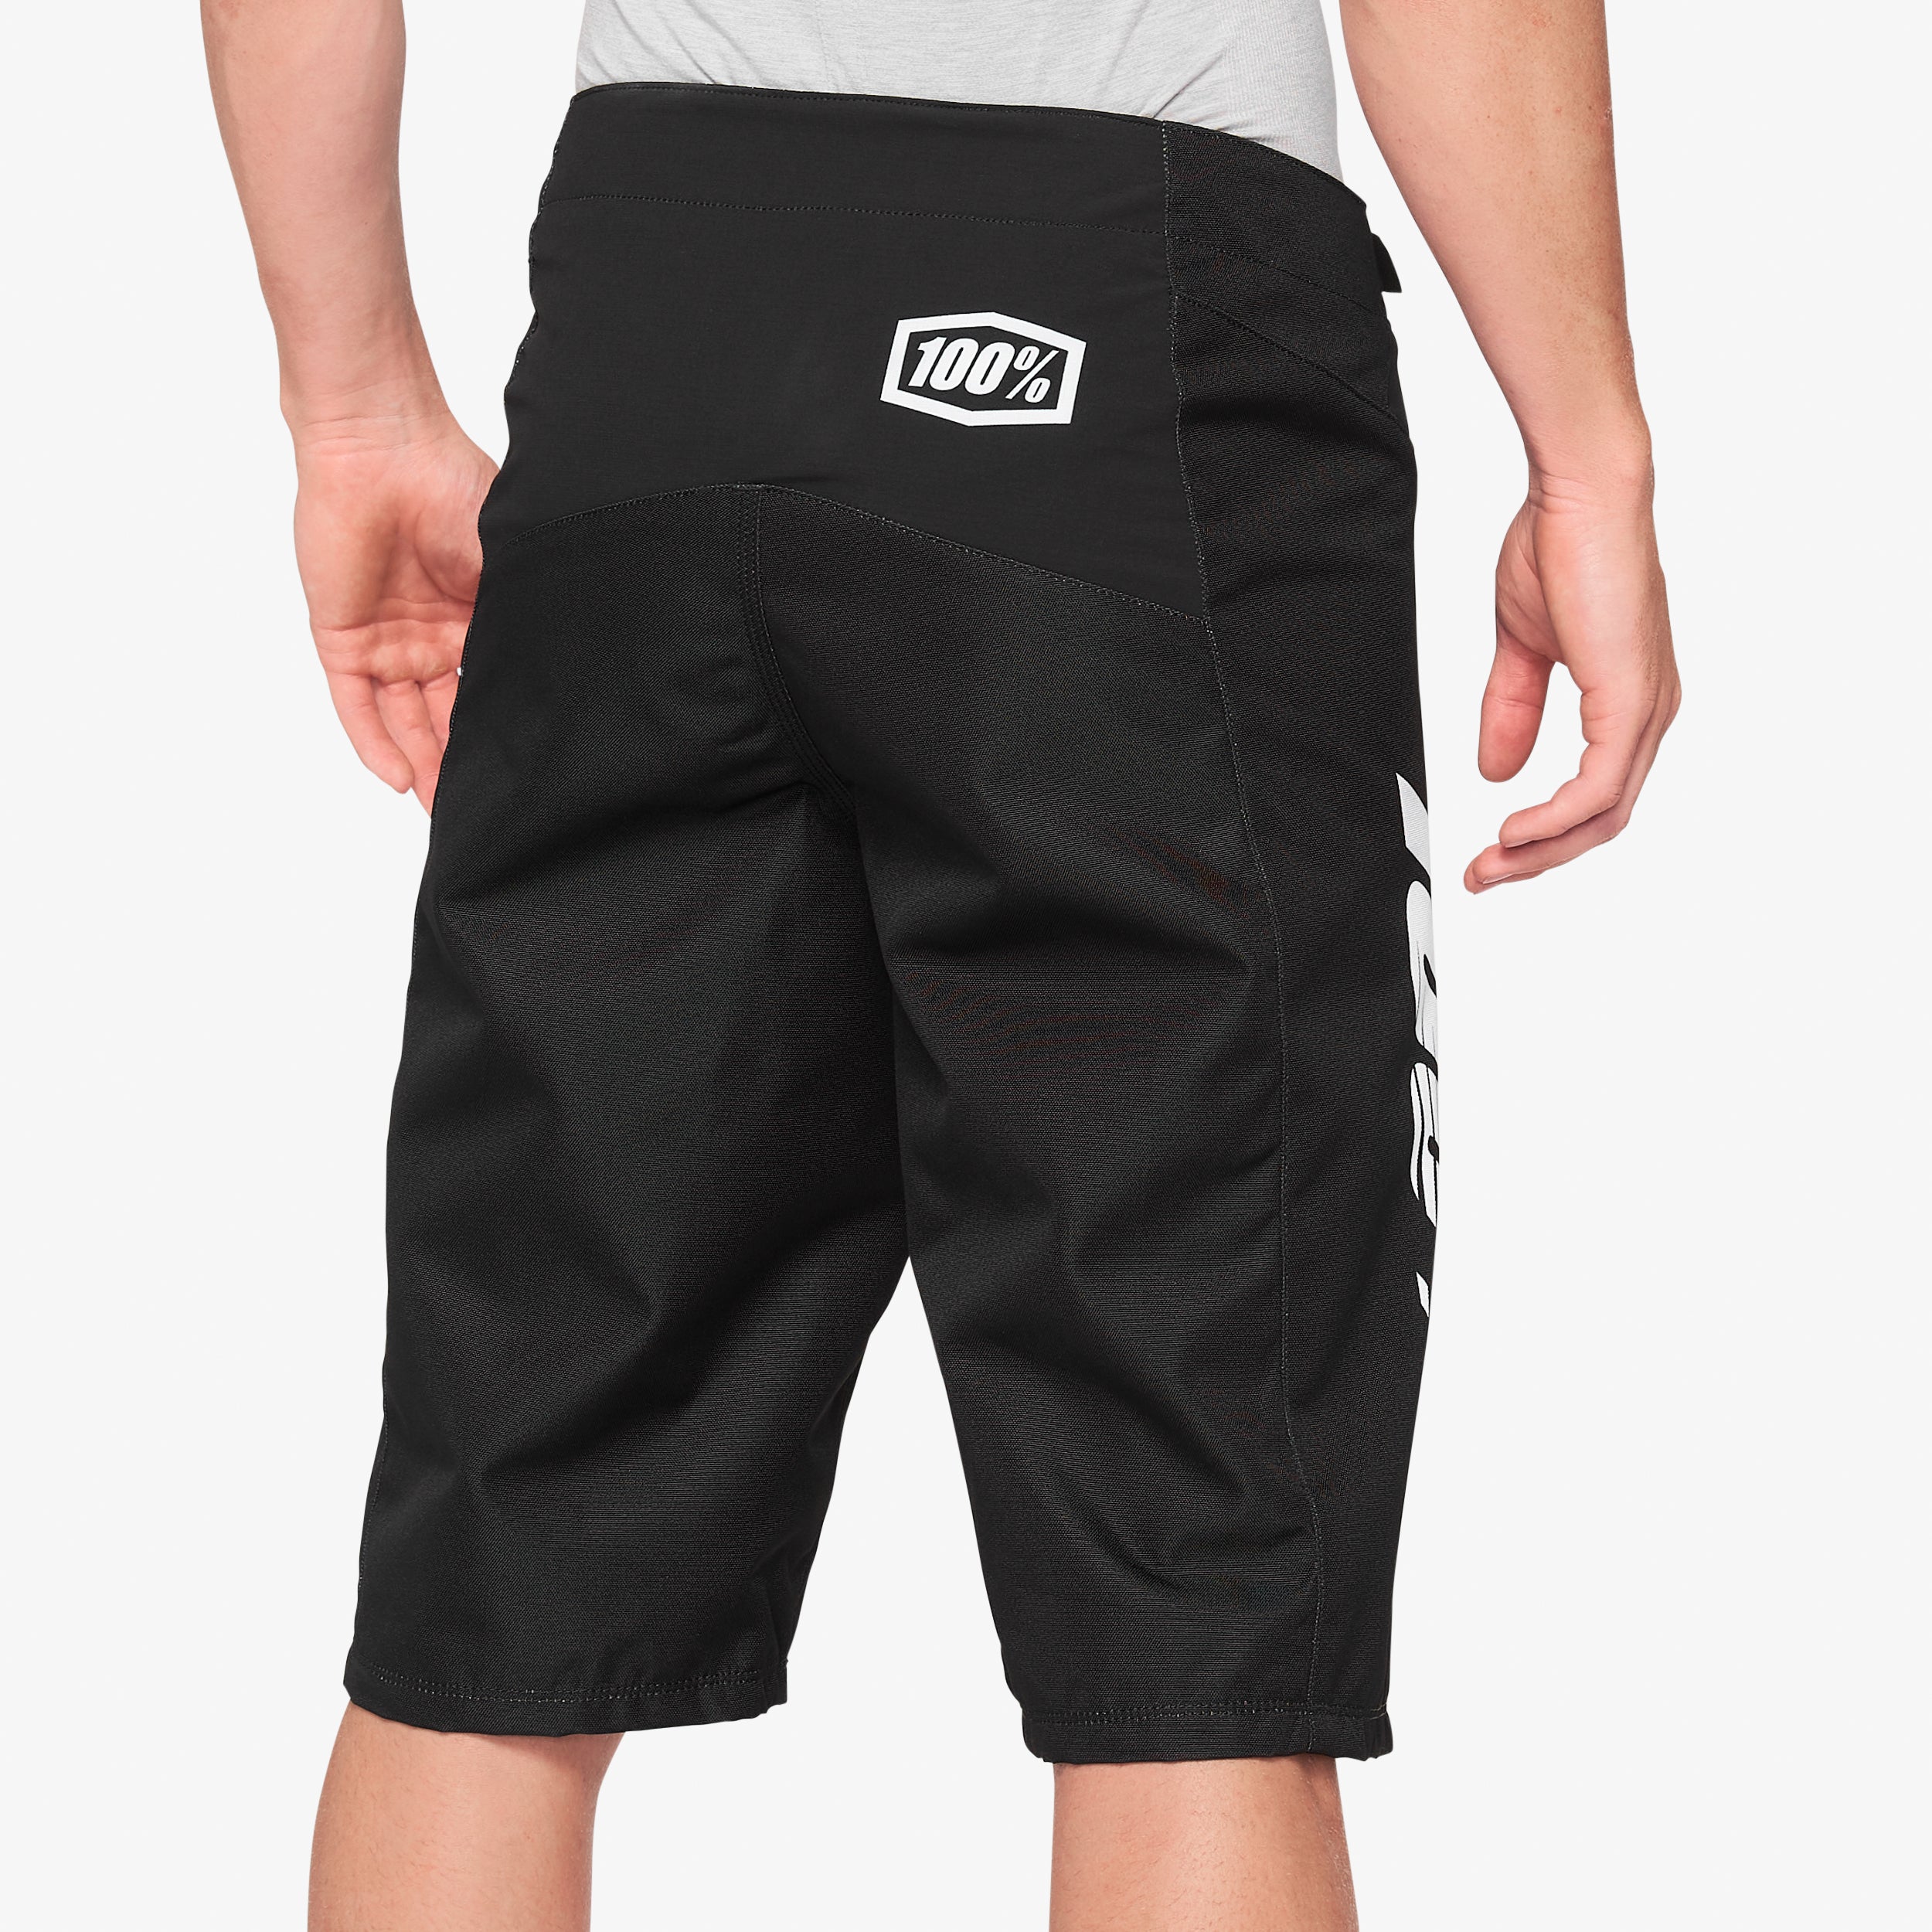 R-CORE Youth Shorts Black - Secondary